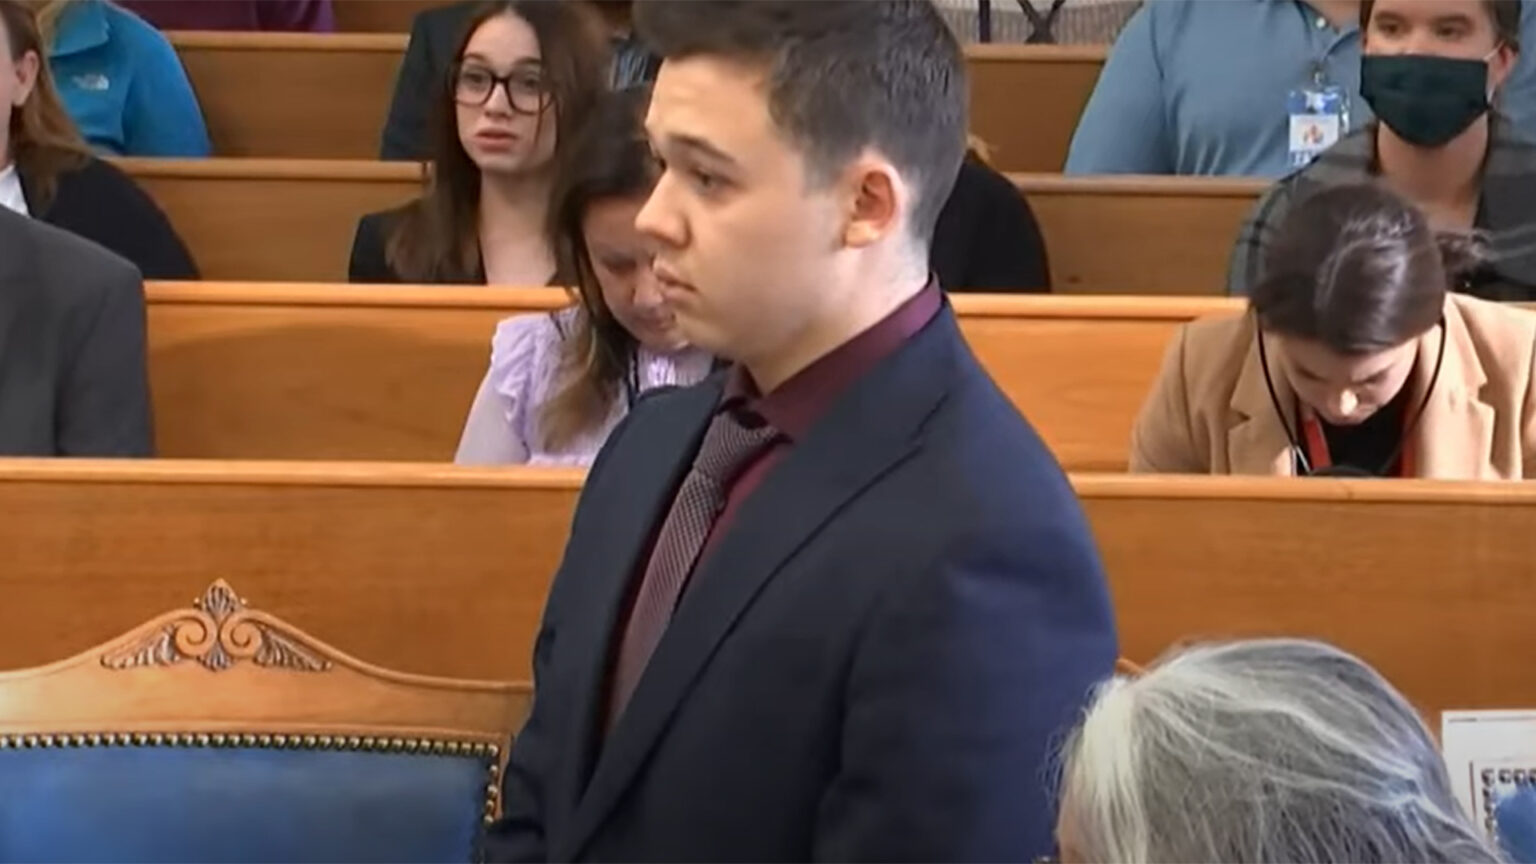 Kyle Rittenhouse stands in a courtroom with observers seated in the background.